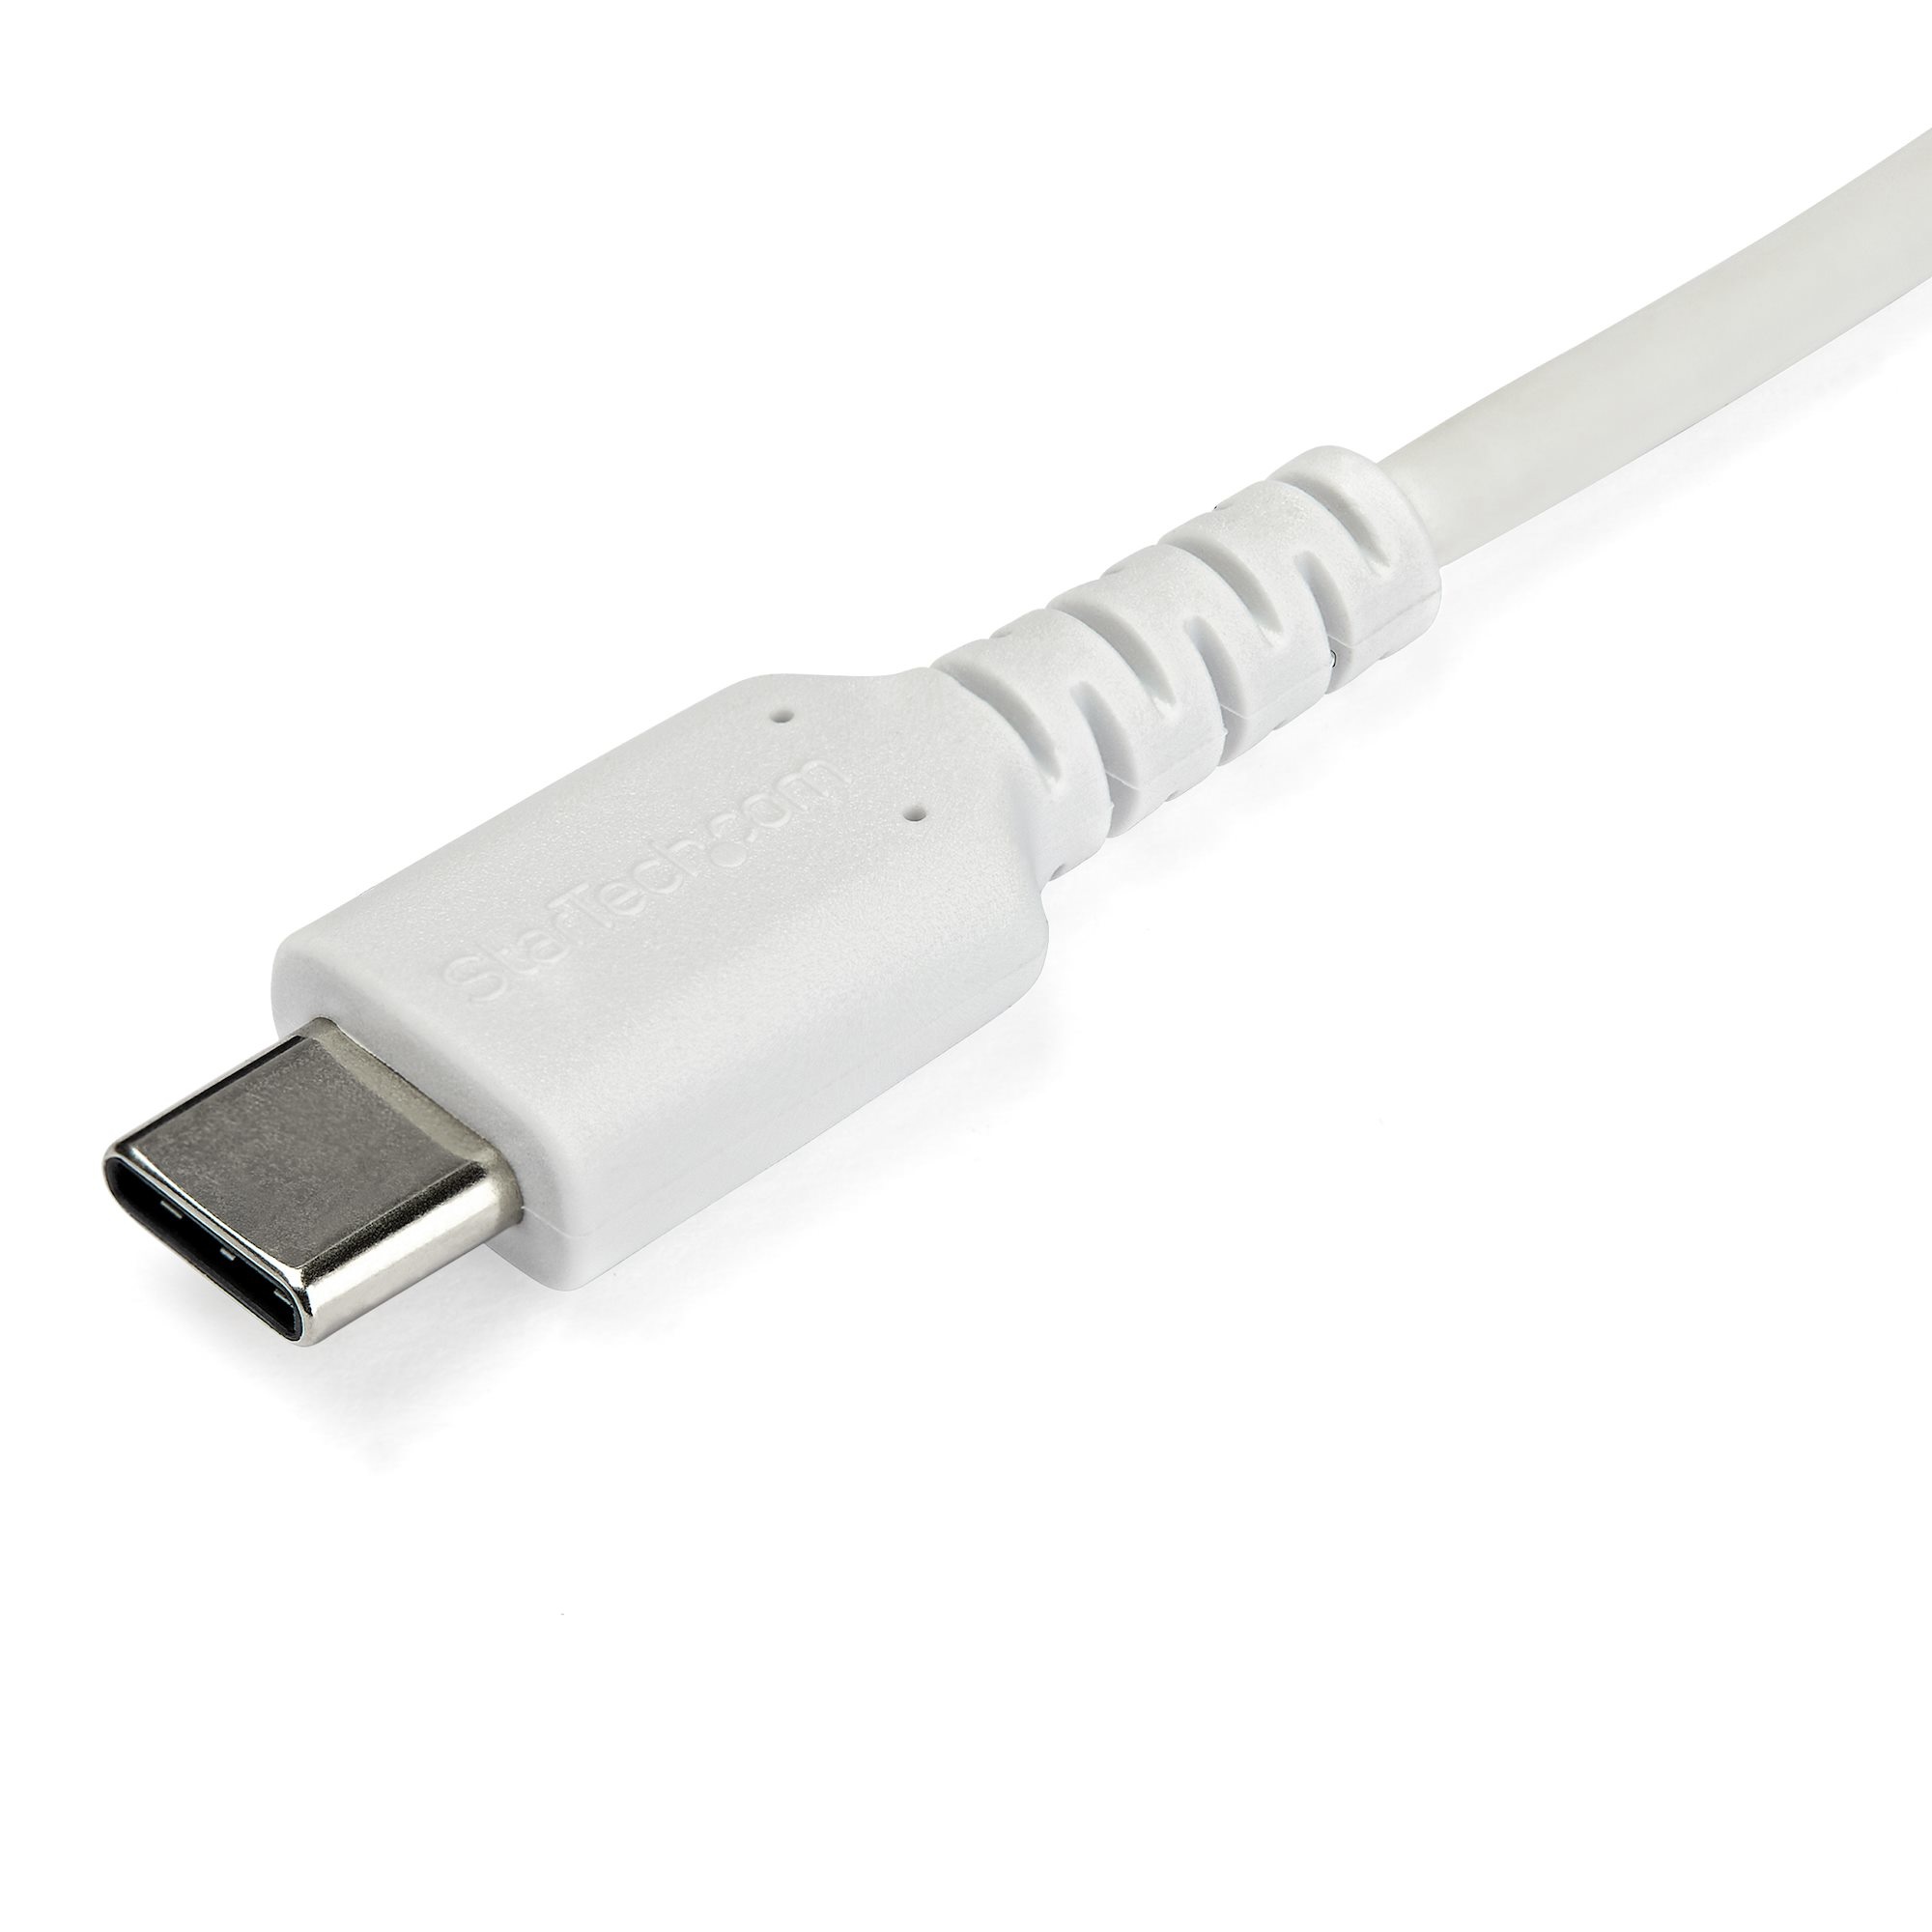 Cable - White USB C Cable 2m afbeelding